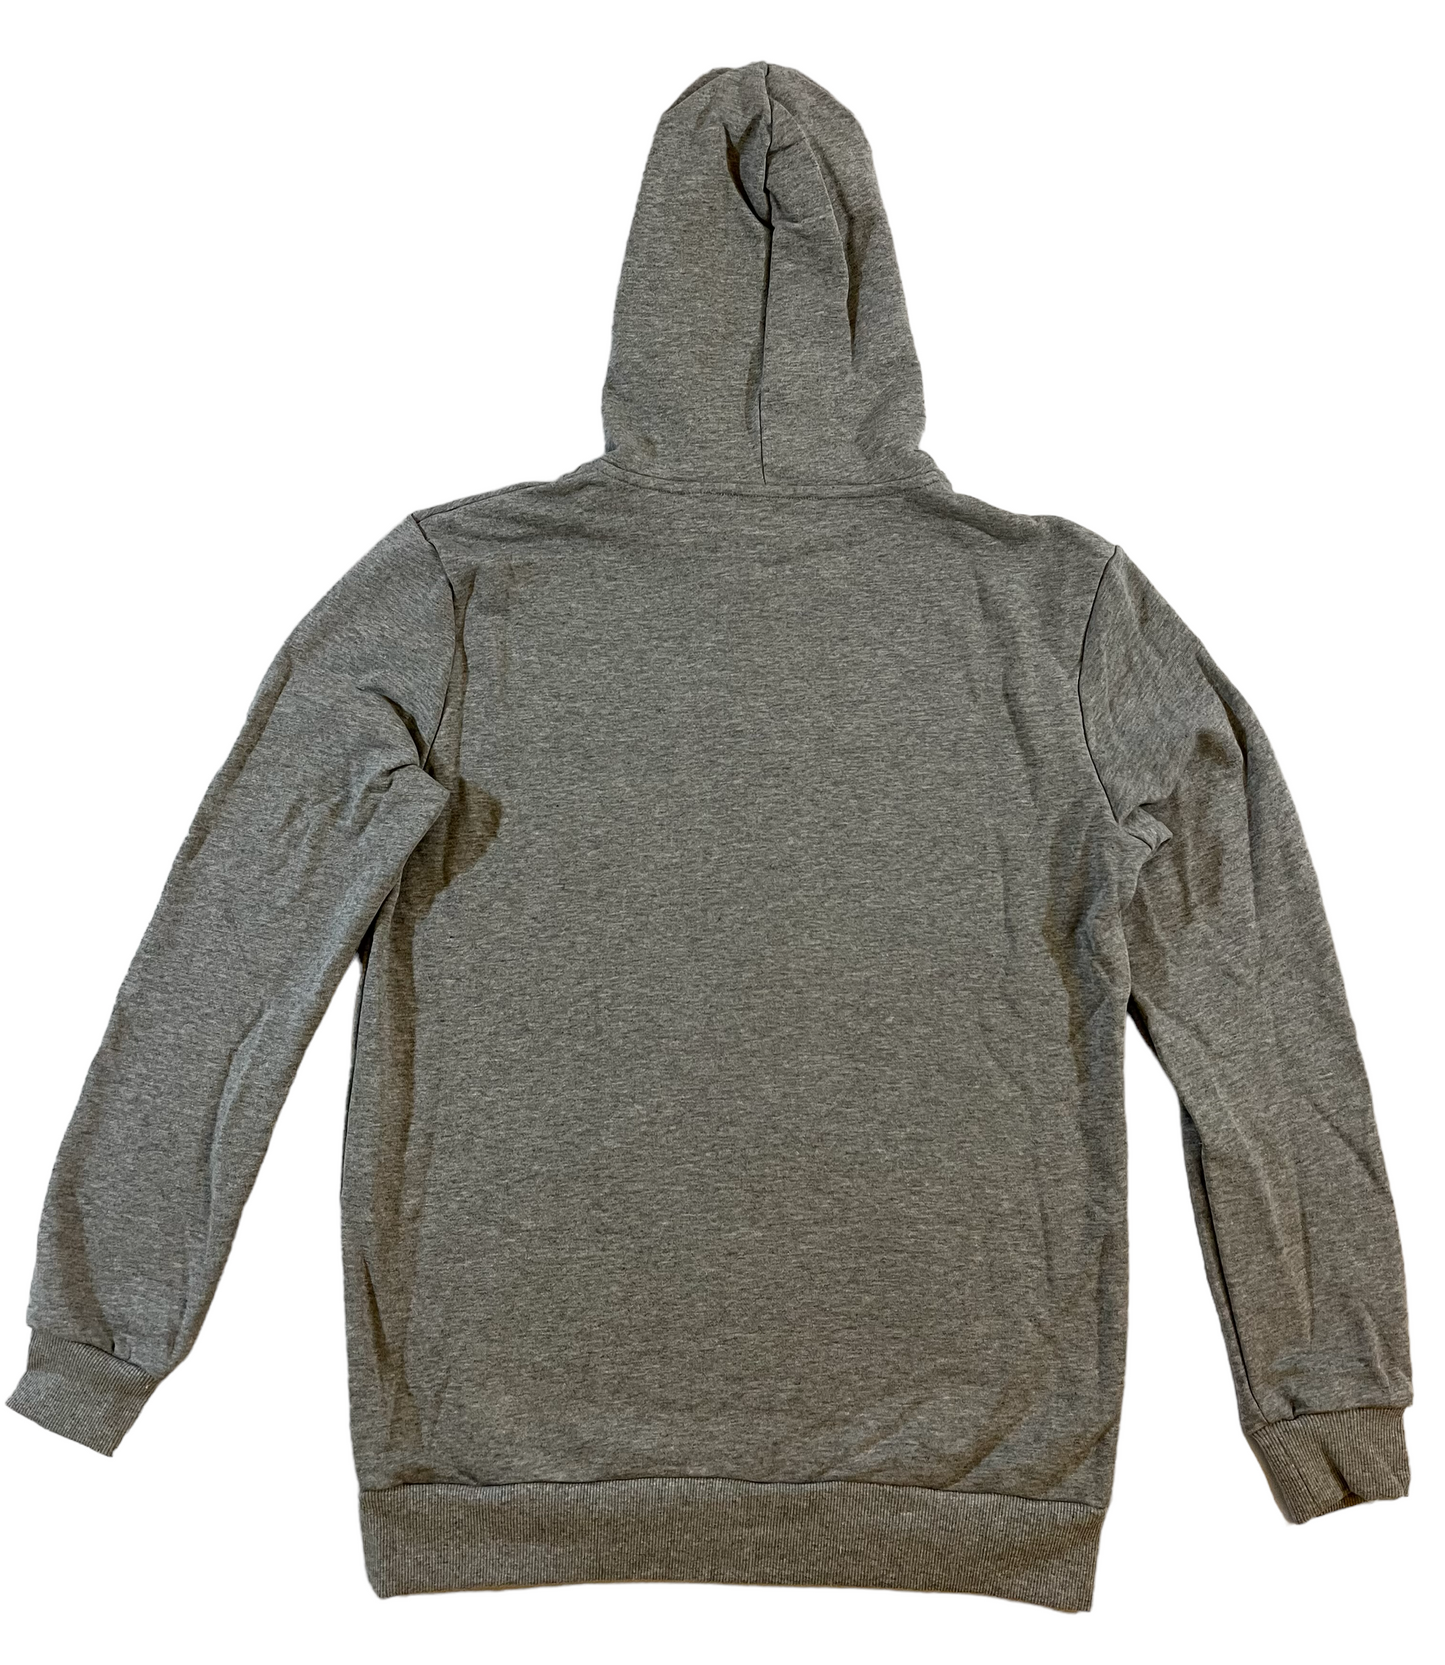 Hoodie - Light Gray with Red Embroidery